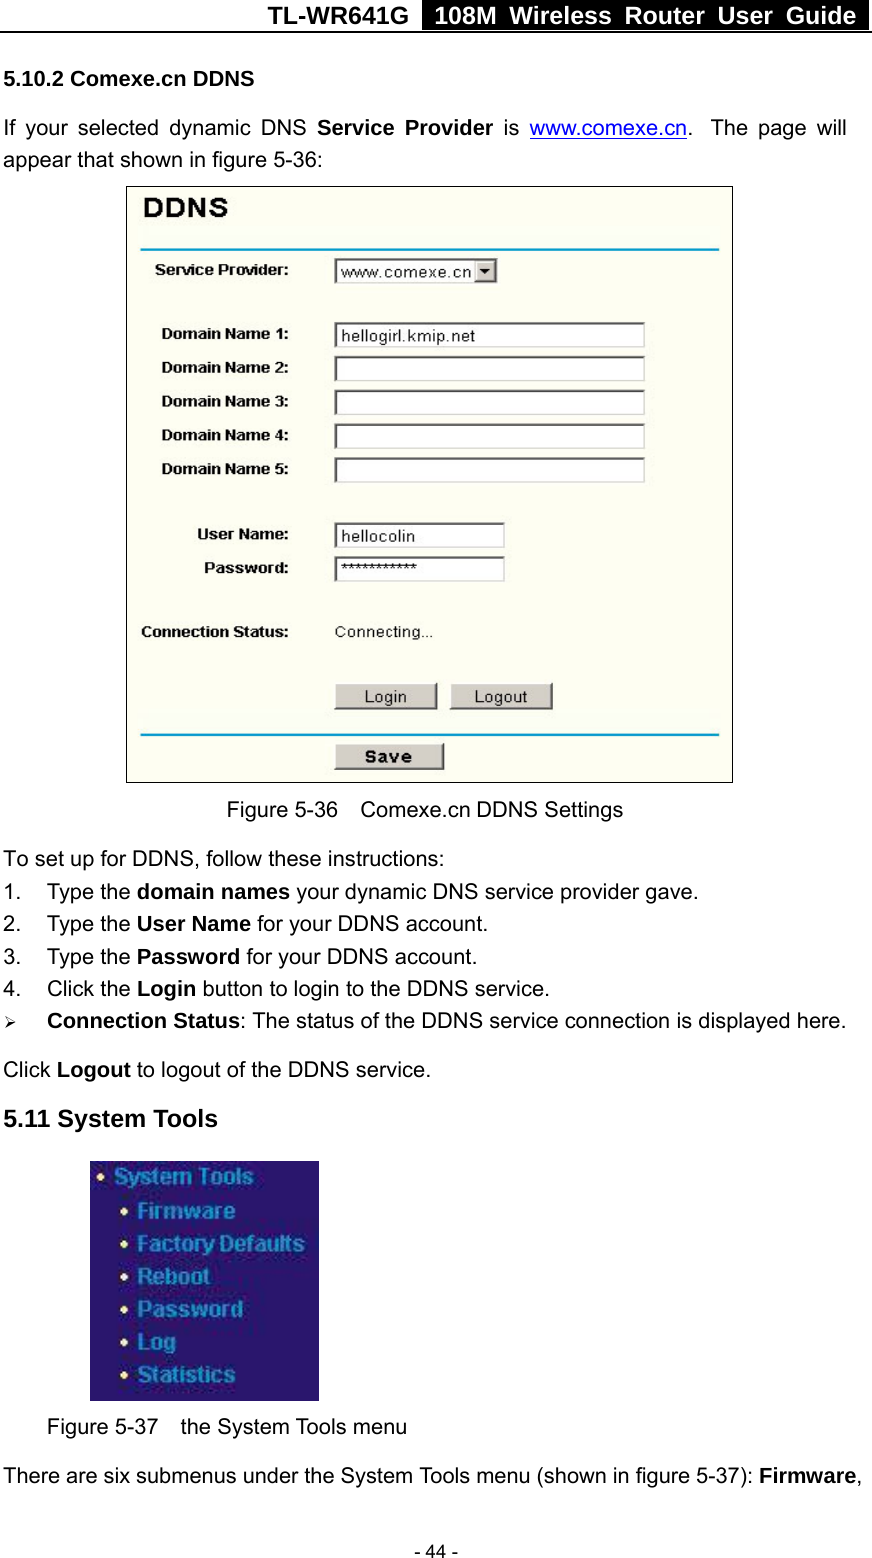 TL-WR641G   108M Wireless Router User Guide   - 44 -5.10.2 Comexe.cn DDNS If your selected dynamic DNS Service Provider is www.comexe.cn.  The page will appear that shown in figure 5-36:  Figure 5-36  Comexe.cn DDNS Settings To set up for DDNS, follow these instructions: 1. Type the domain names your dynamic DNS service provider gave.   2. Type the User Name for your DDNS account.   3. Type the Password for your DDNS account.   4. Click the Login button to login to the DDNS service. ¾ Connection Status: The status of the DDNS service connection is displayed here. Click Logout to logout of the DDNS service. 5.11 System Tools  Figure 5-37  the System Tools menu There are six submenus under the System Tools menu (shown in figure 5-37): Firmware, 